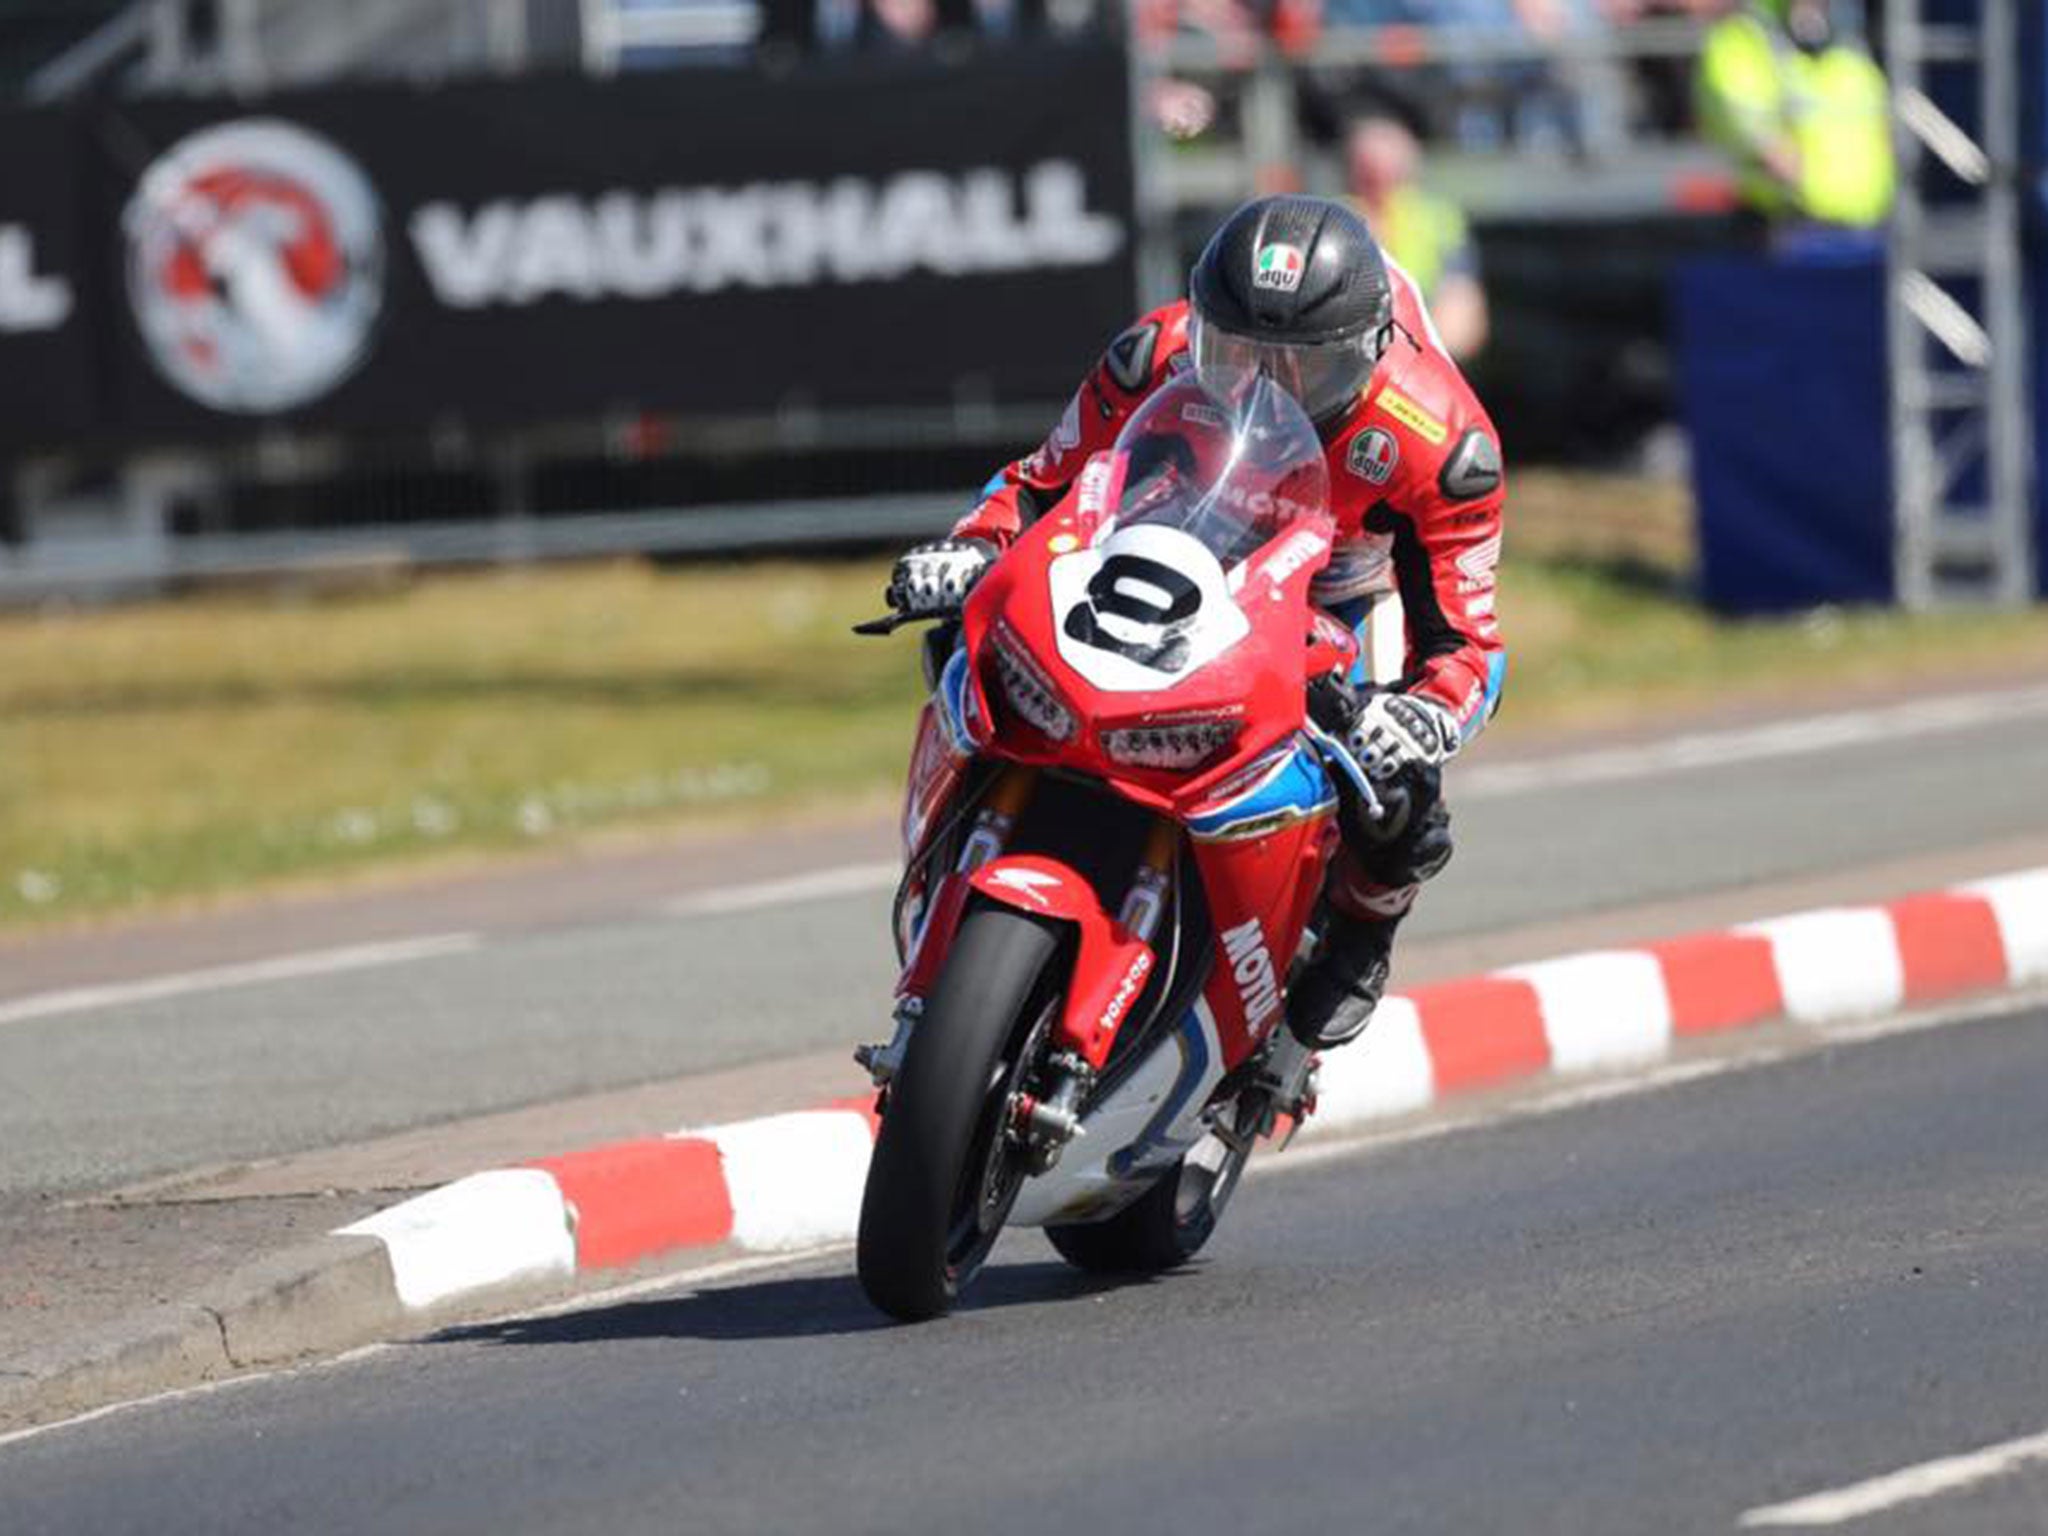 Martin won't compete on his superbike or superstock at the North West 200